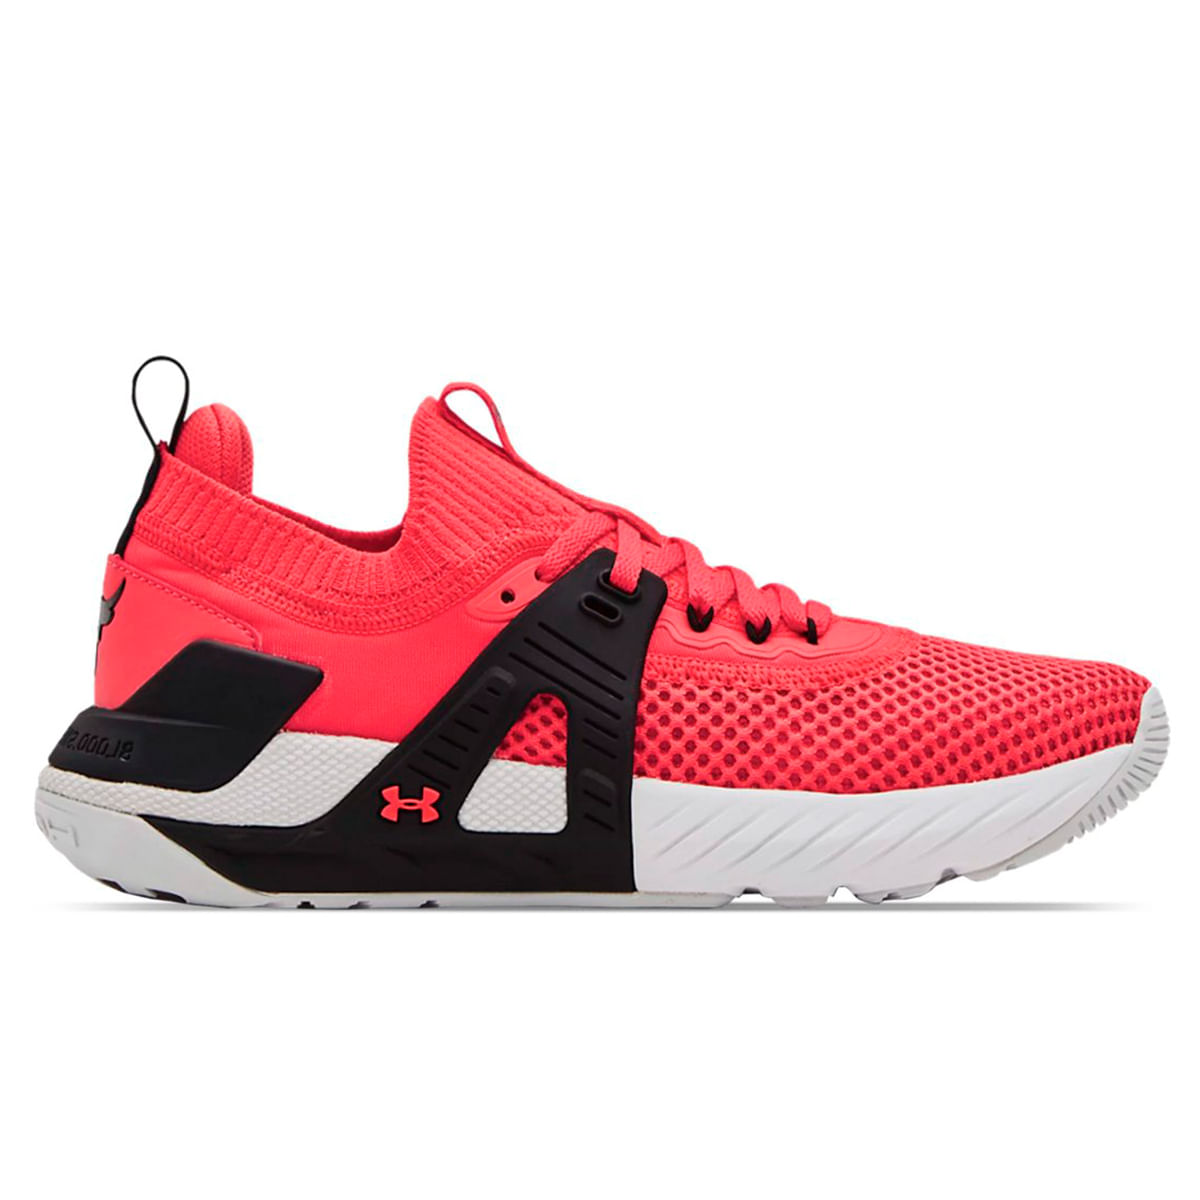 Zapatillas Under Armour Training Project Rock Mujer